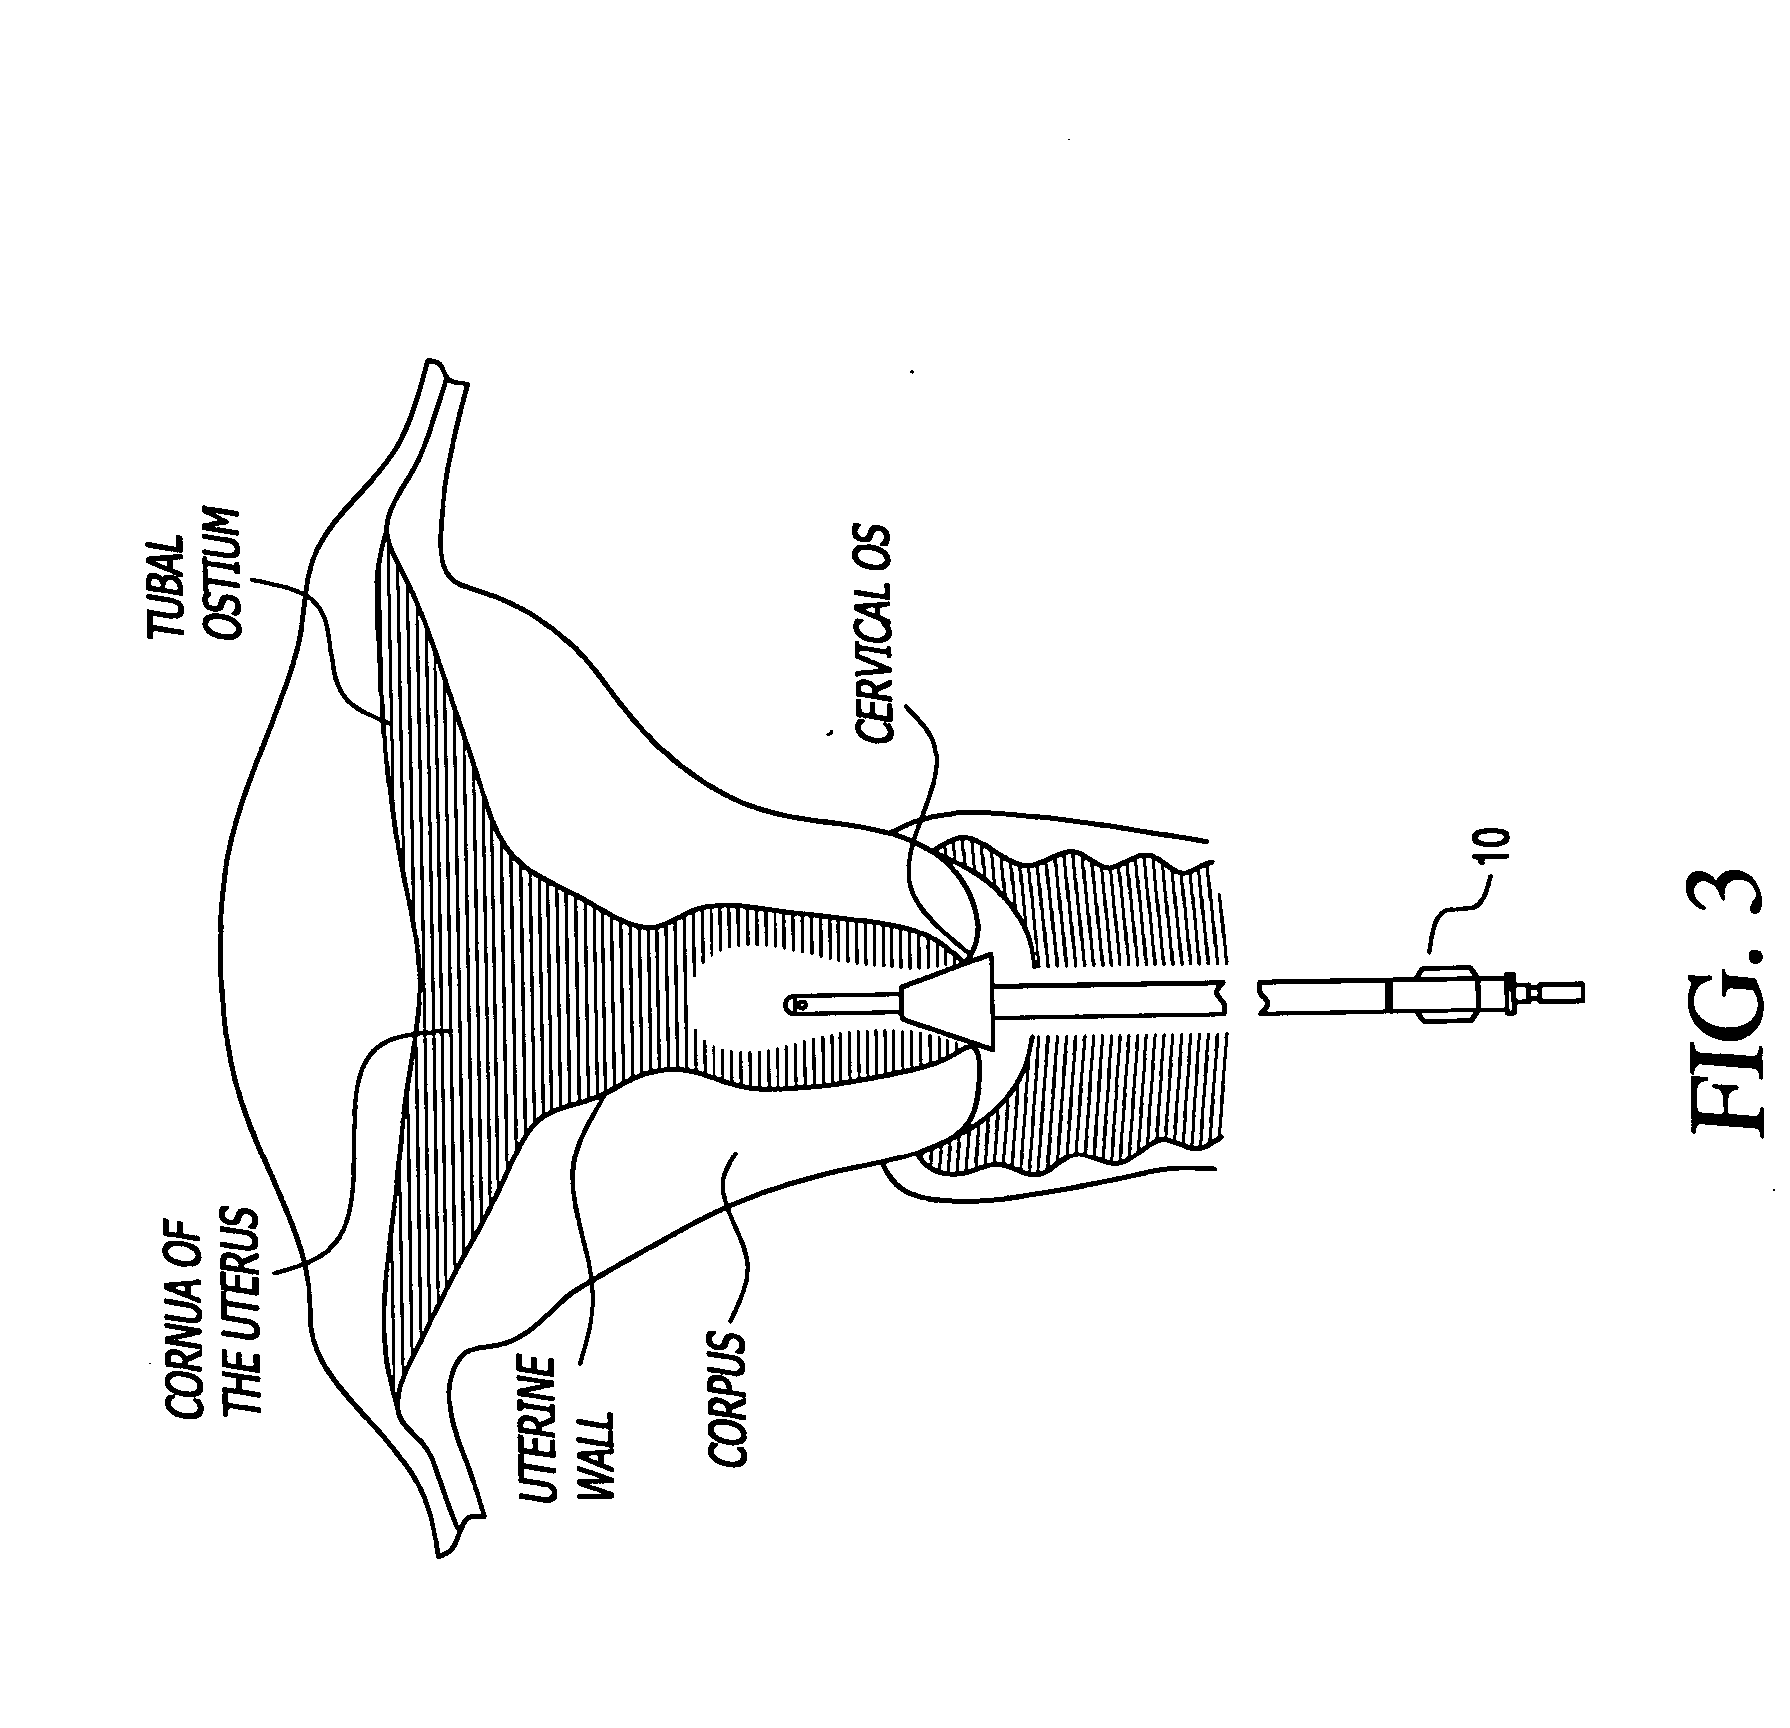 Intrauterine anesthetic applicator and cell collection device and method of use